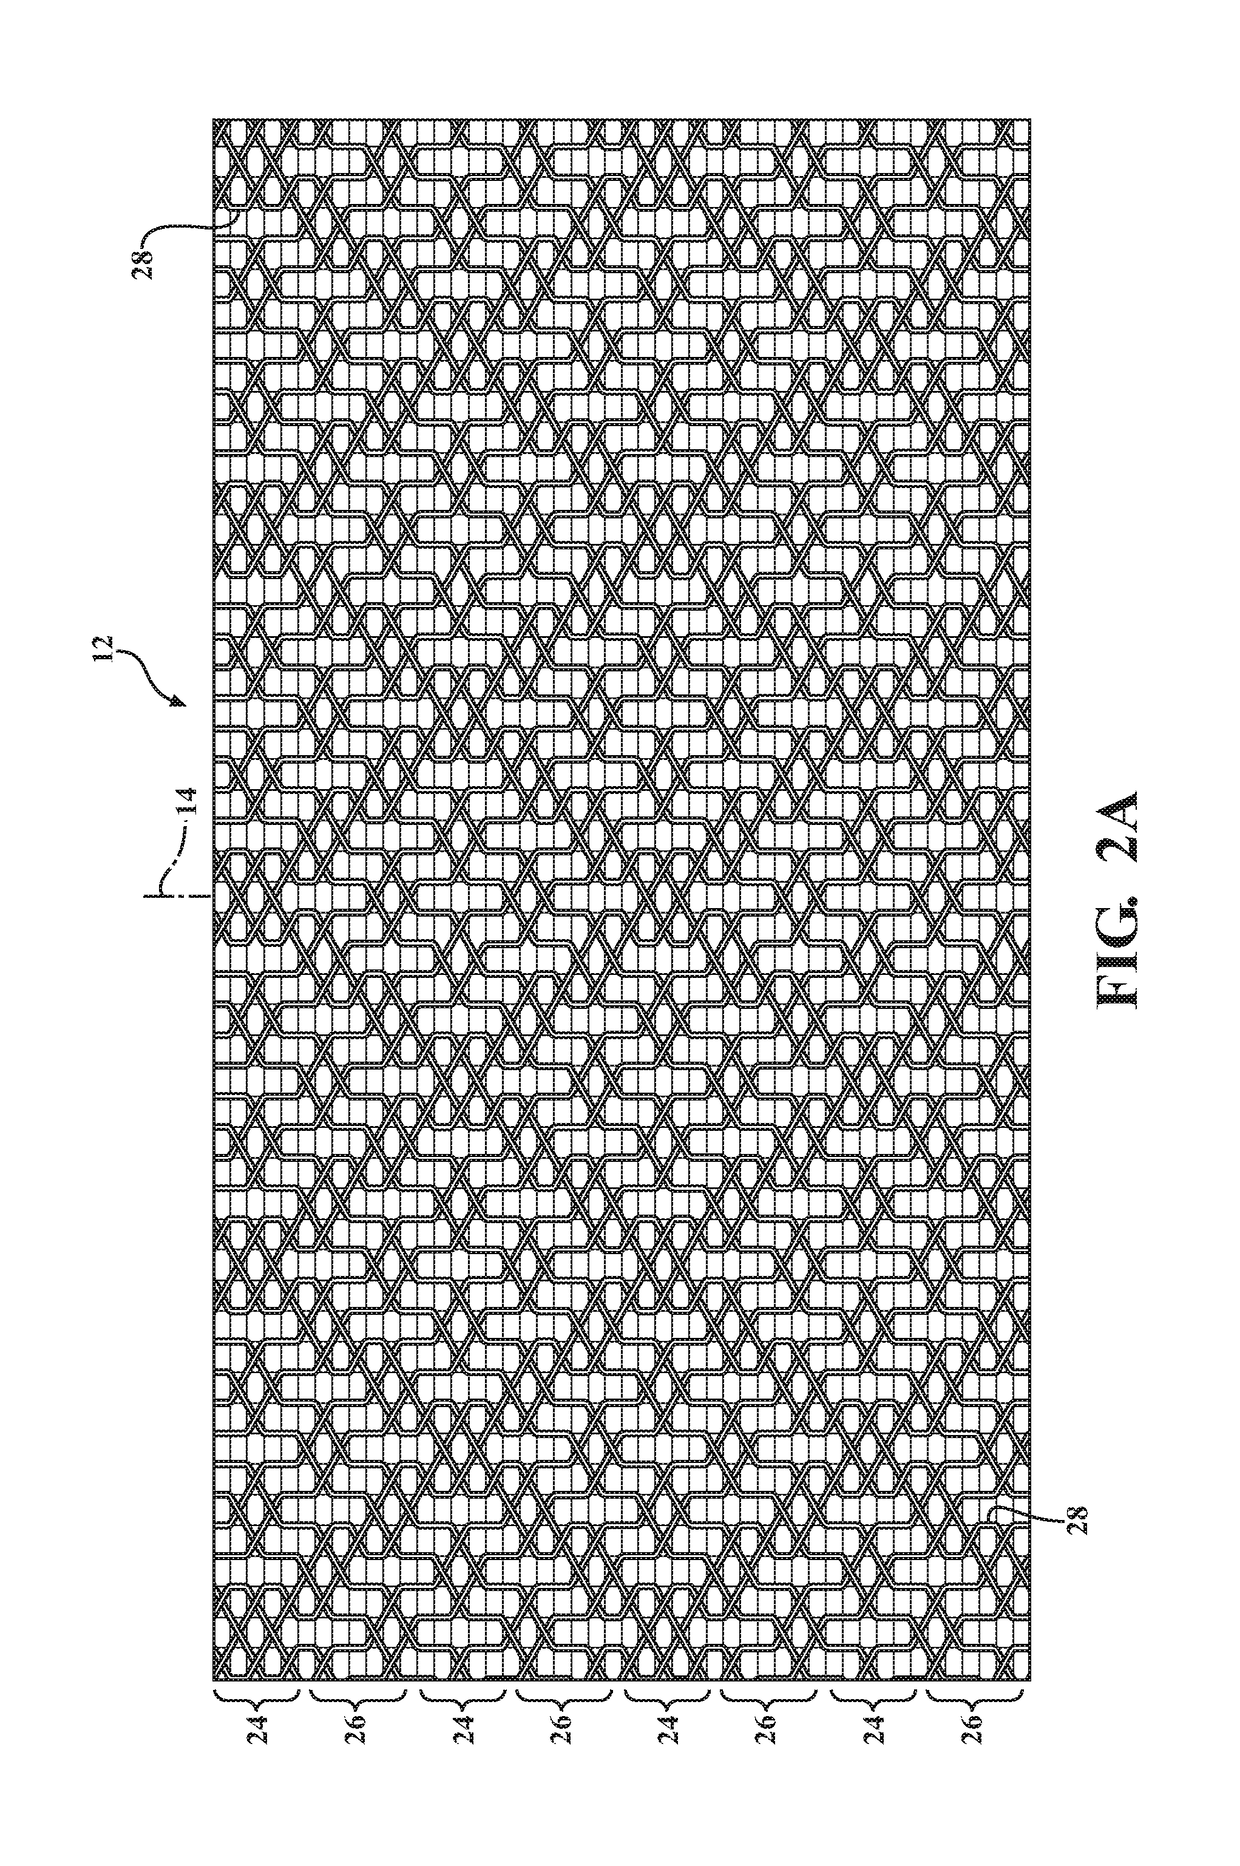 Braided textile sleeve with axially collapsible, Anti-kinking feature and method of construction thereof